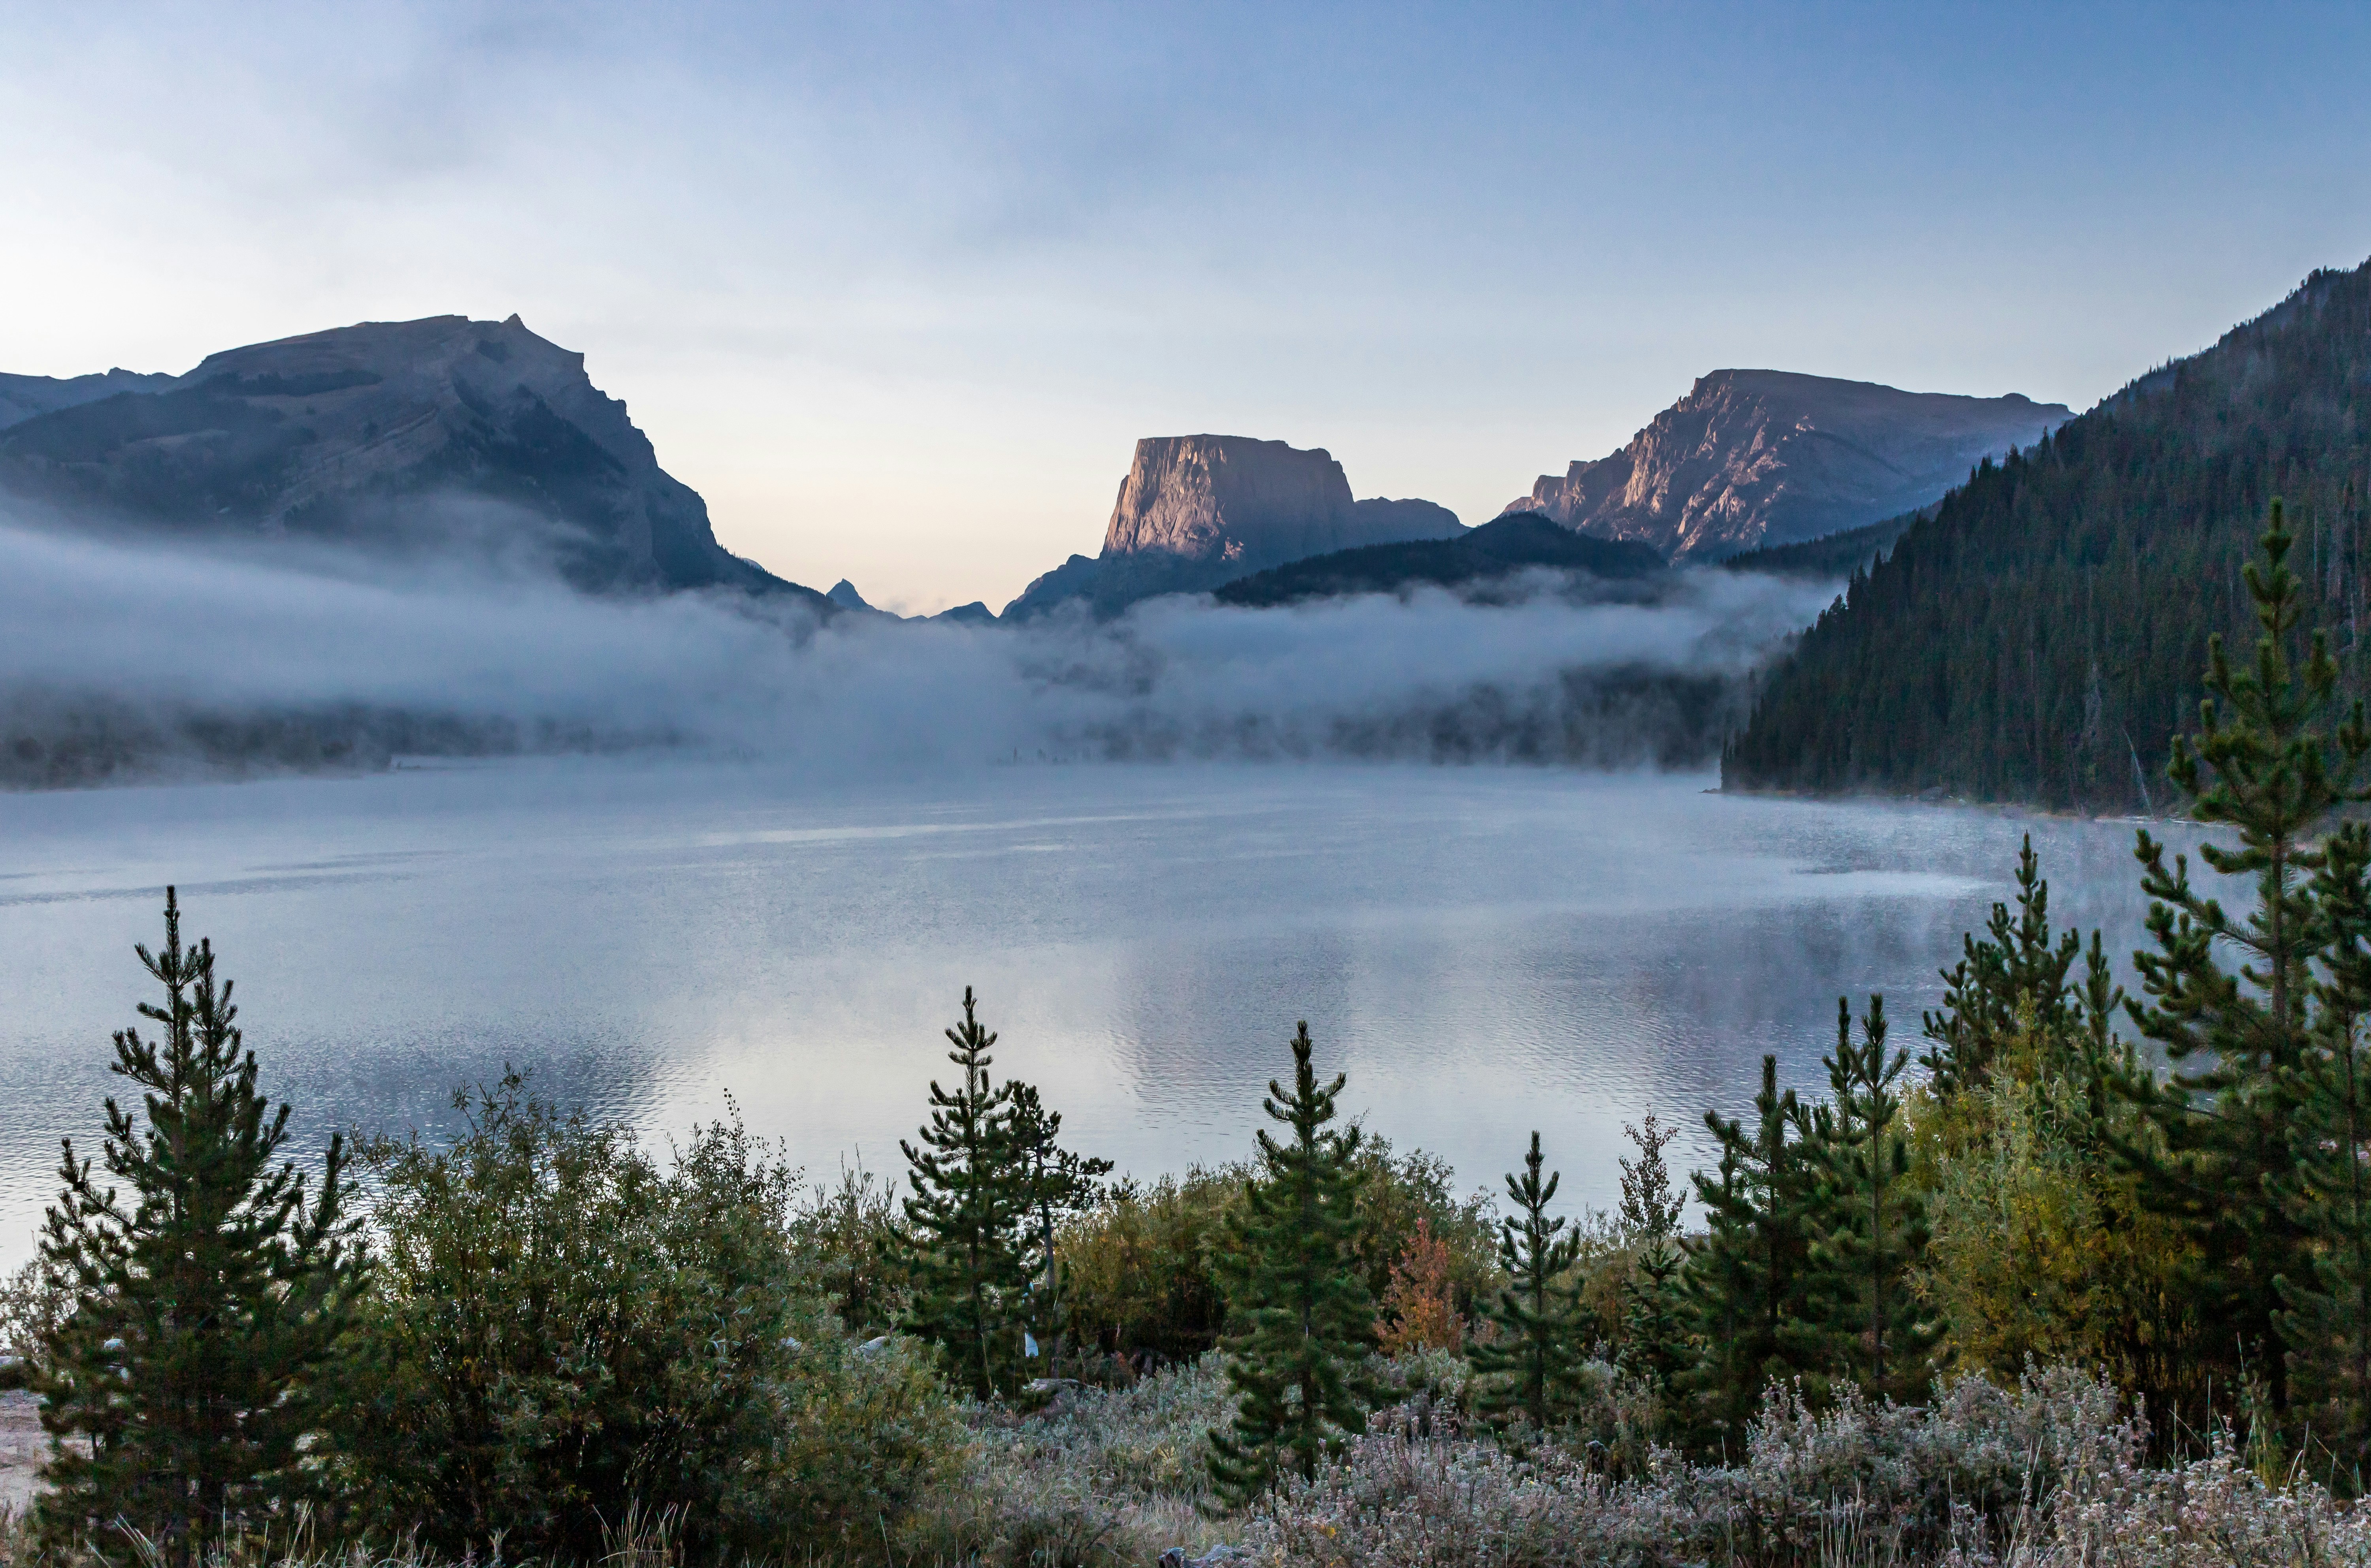 Early morning fog/cloud laying over Green River Lake with Squaretop Mtn in the background at sunrise.